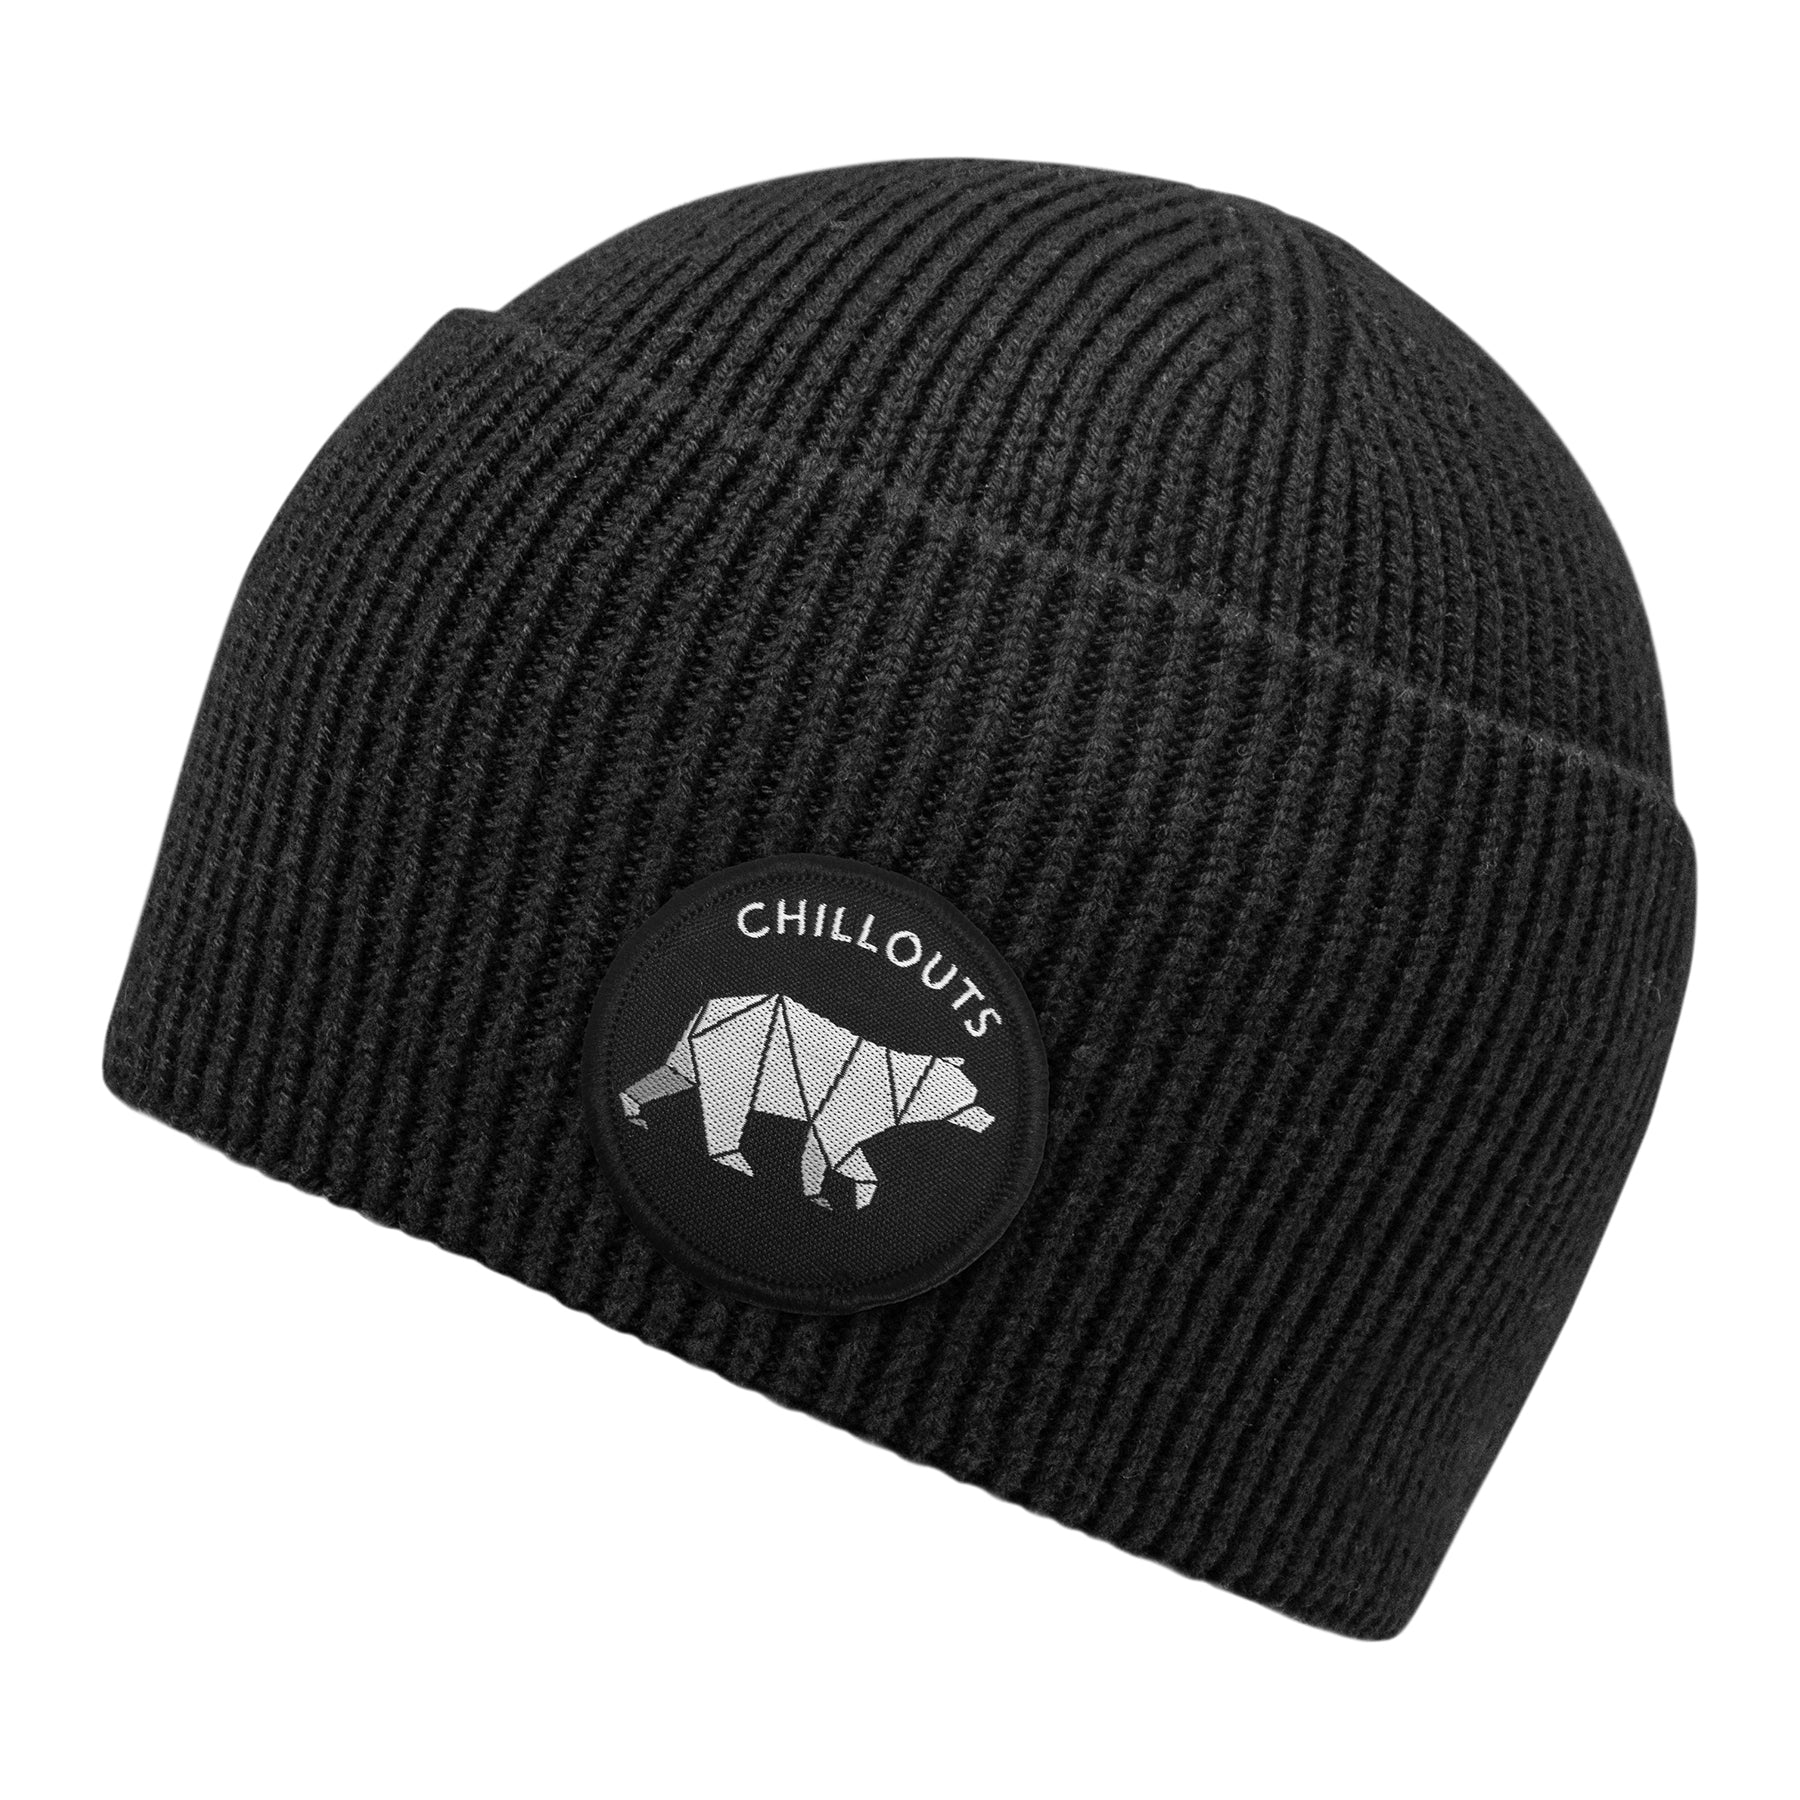 Beanie with cuff & good – - Chillouts cool hat Headwear a embroidery cause for